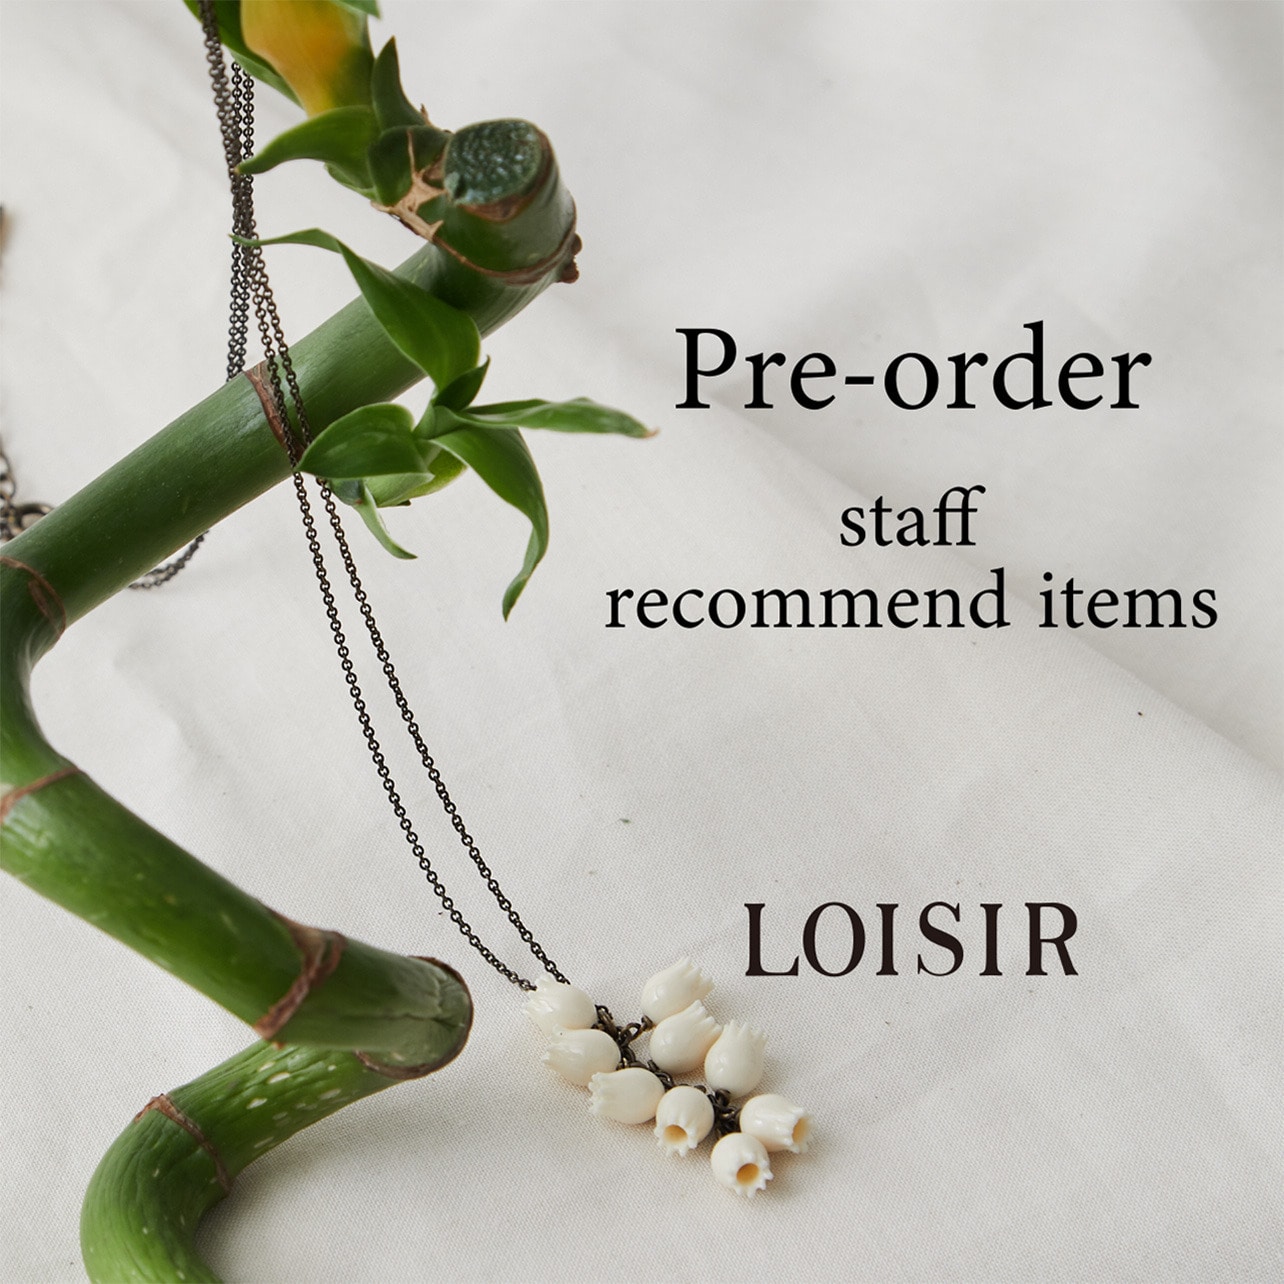 Pre-order staff recommend items					